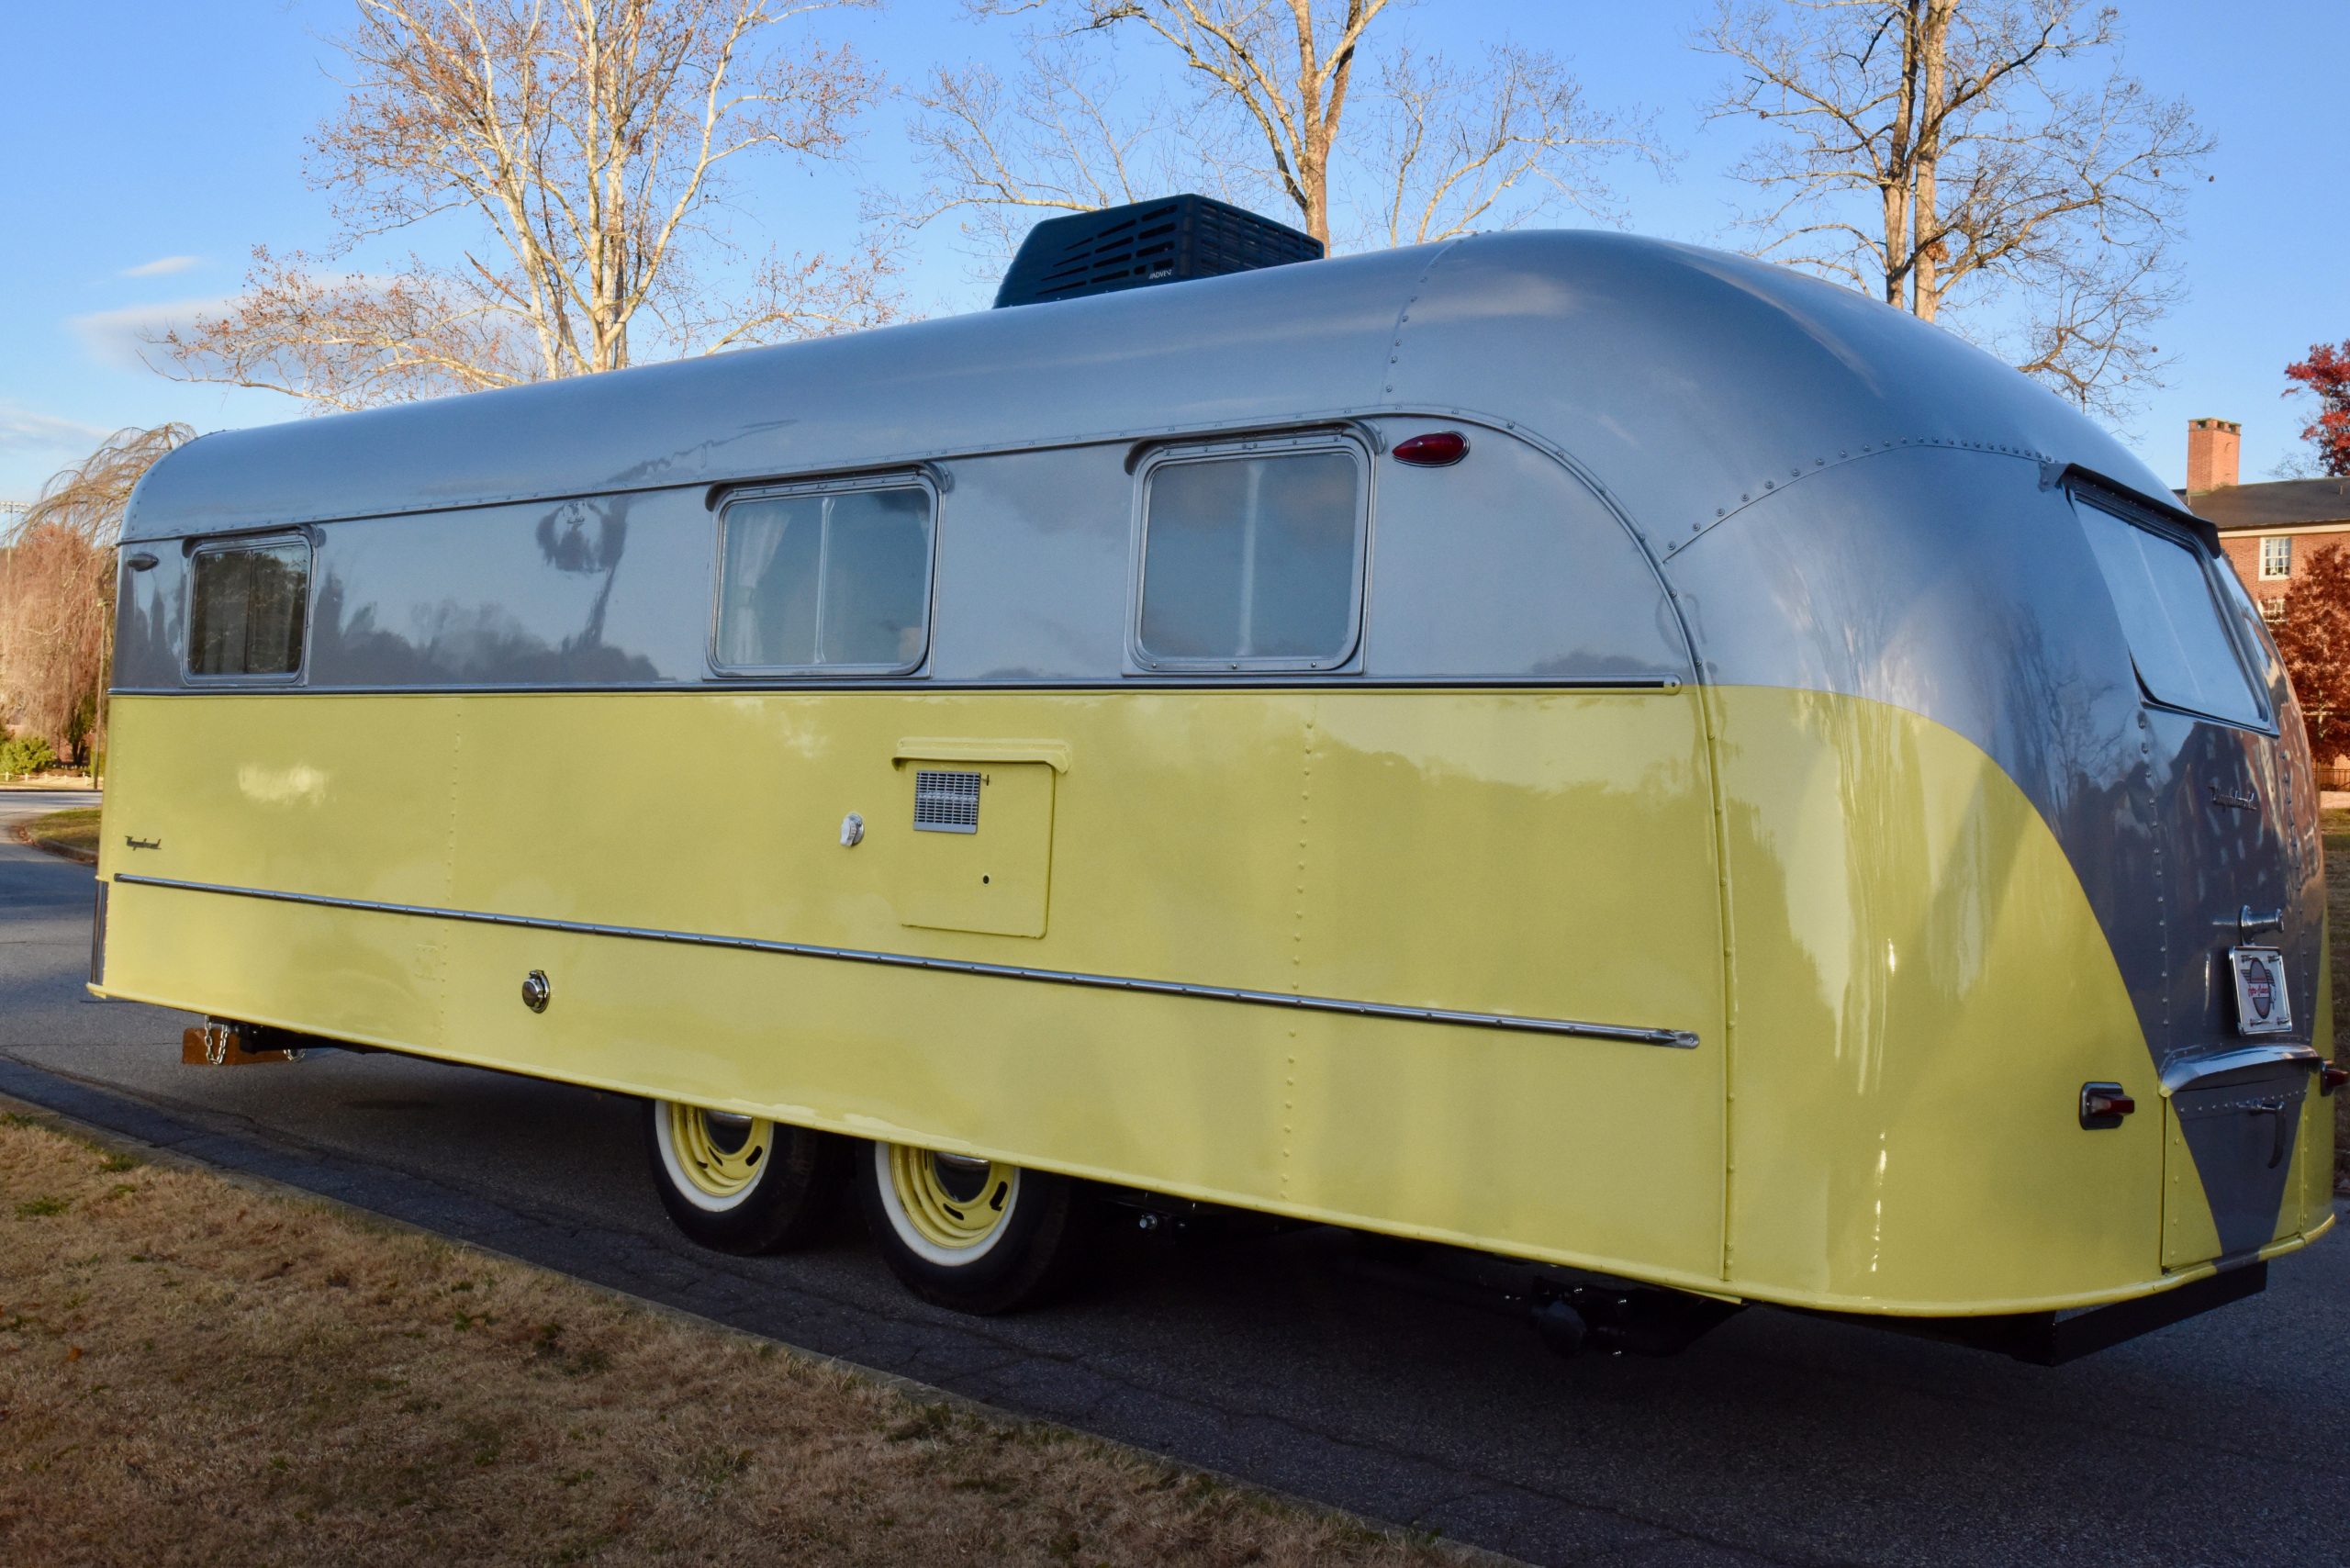 The Vintage Camper Trailers Magazine Issue #47 January February 2020